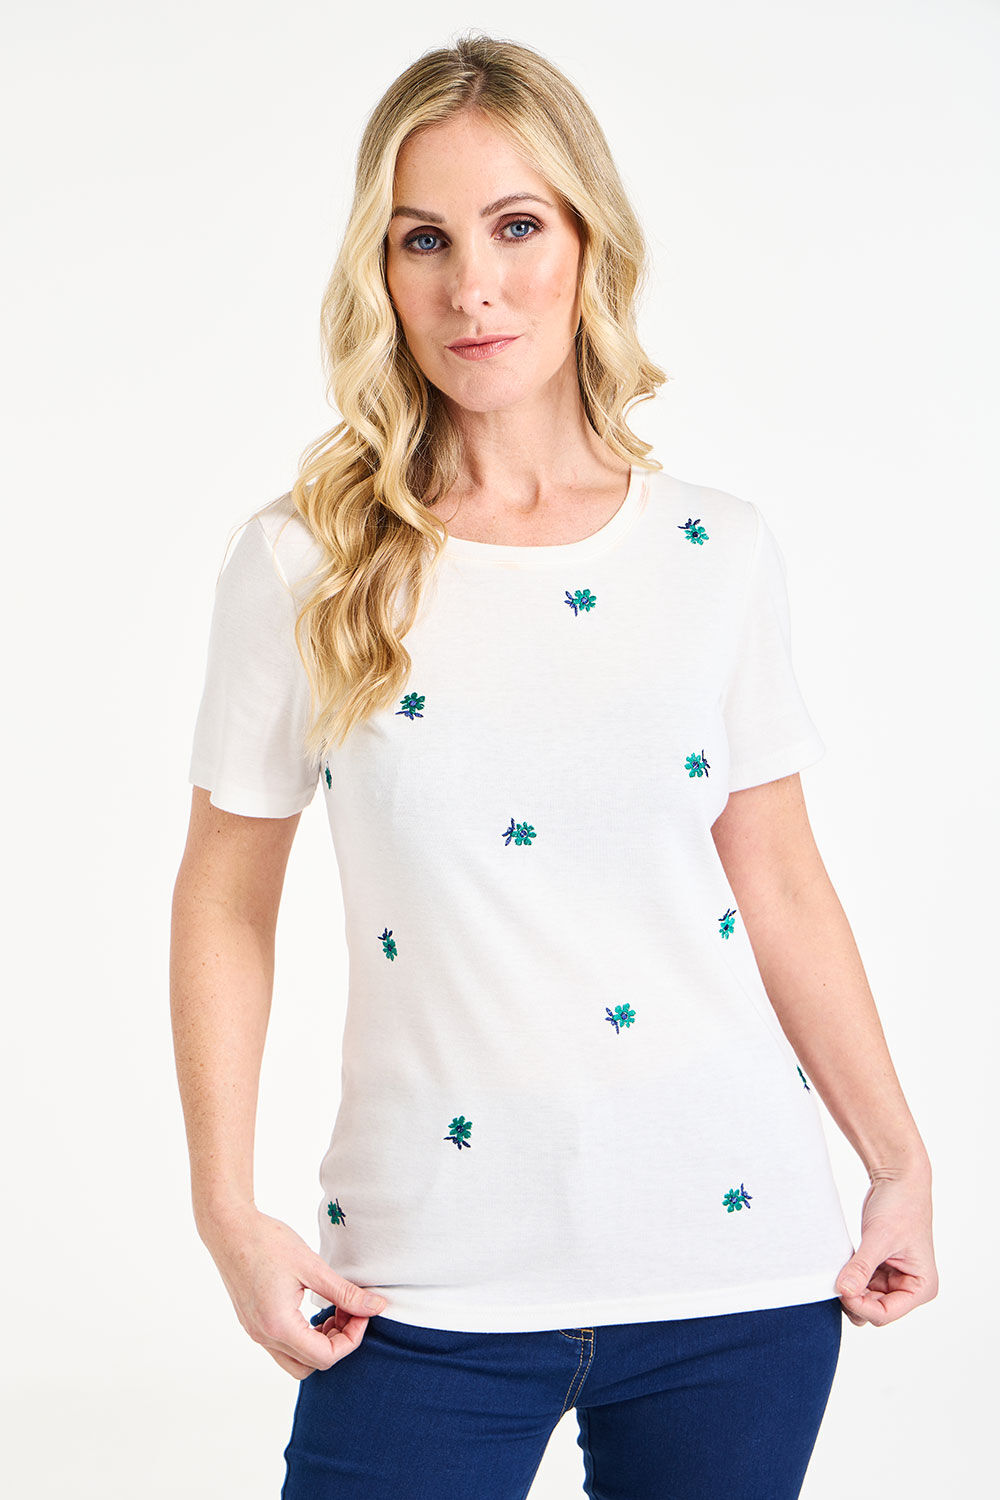 Bonmarche White Short Sleeve Embroidered Daisy T-Shirt, Size: 28